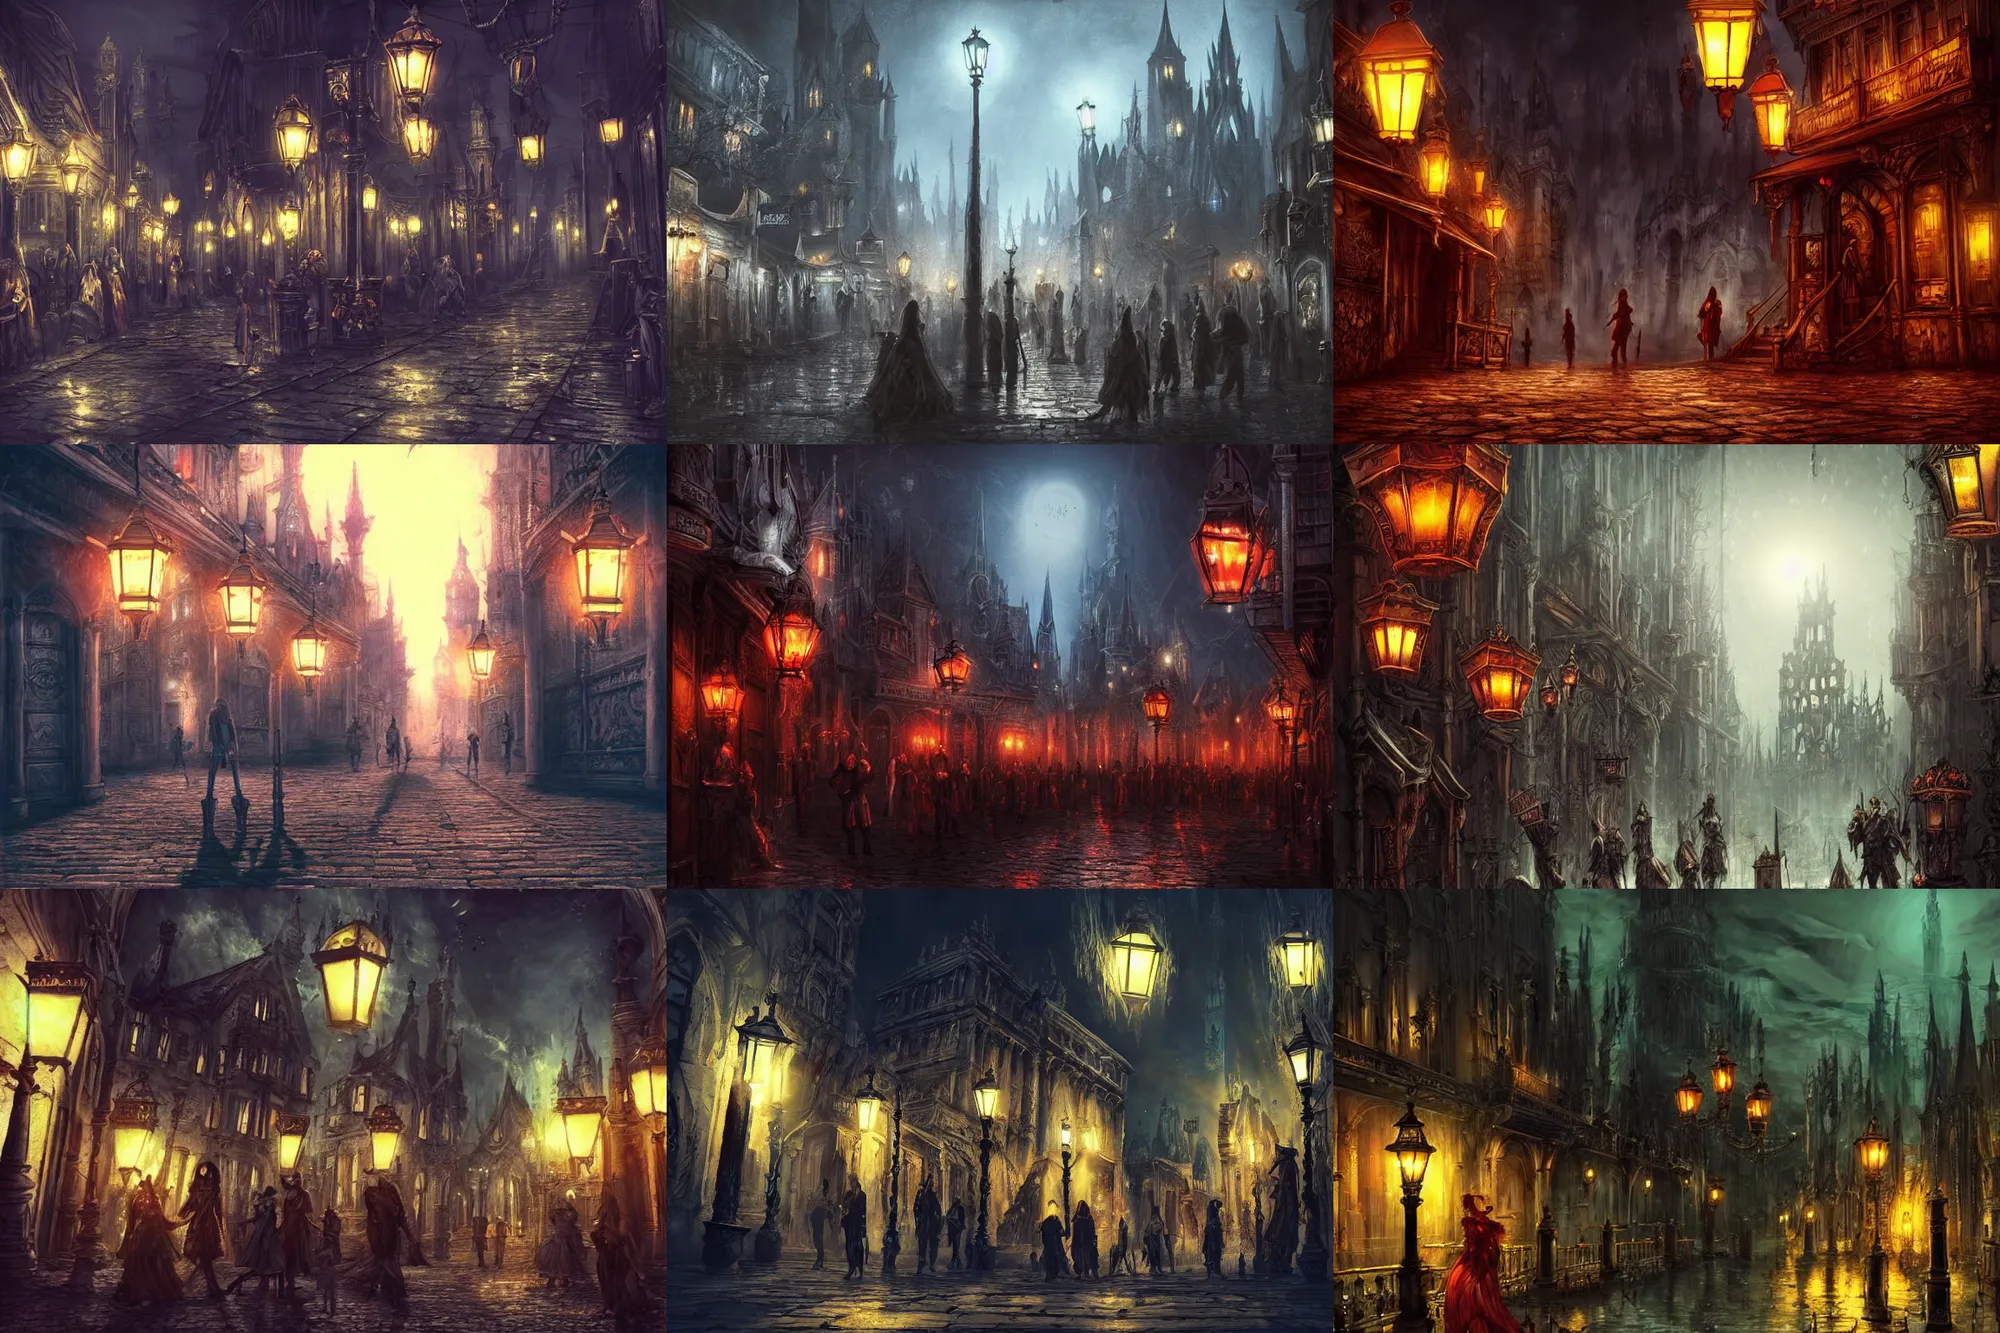 Prompt: style : dark fantasy. composition : long shot, waist level ; low angle. key words : digital art ; detailed ; 4 k. scenery : a gothic harbor city with blood on the streets. subject : none. details : at night ; lanterns in the streets.